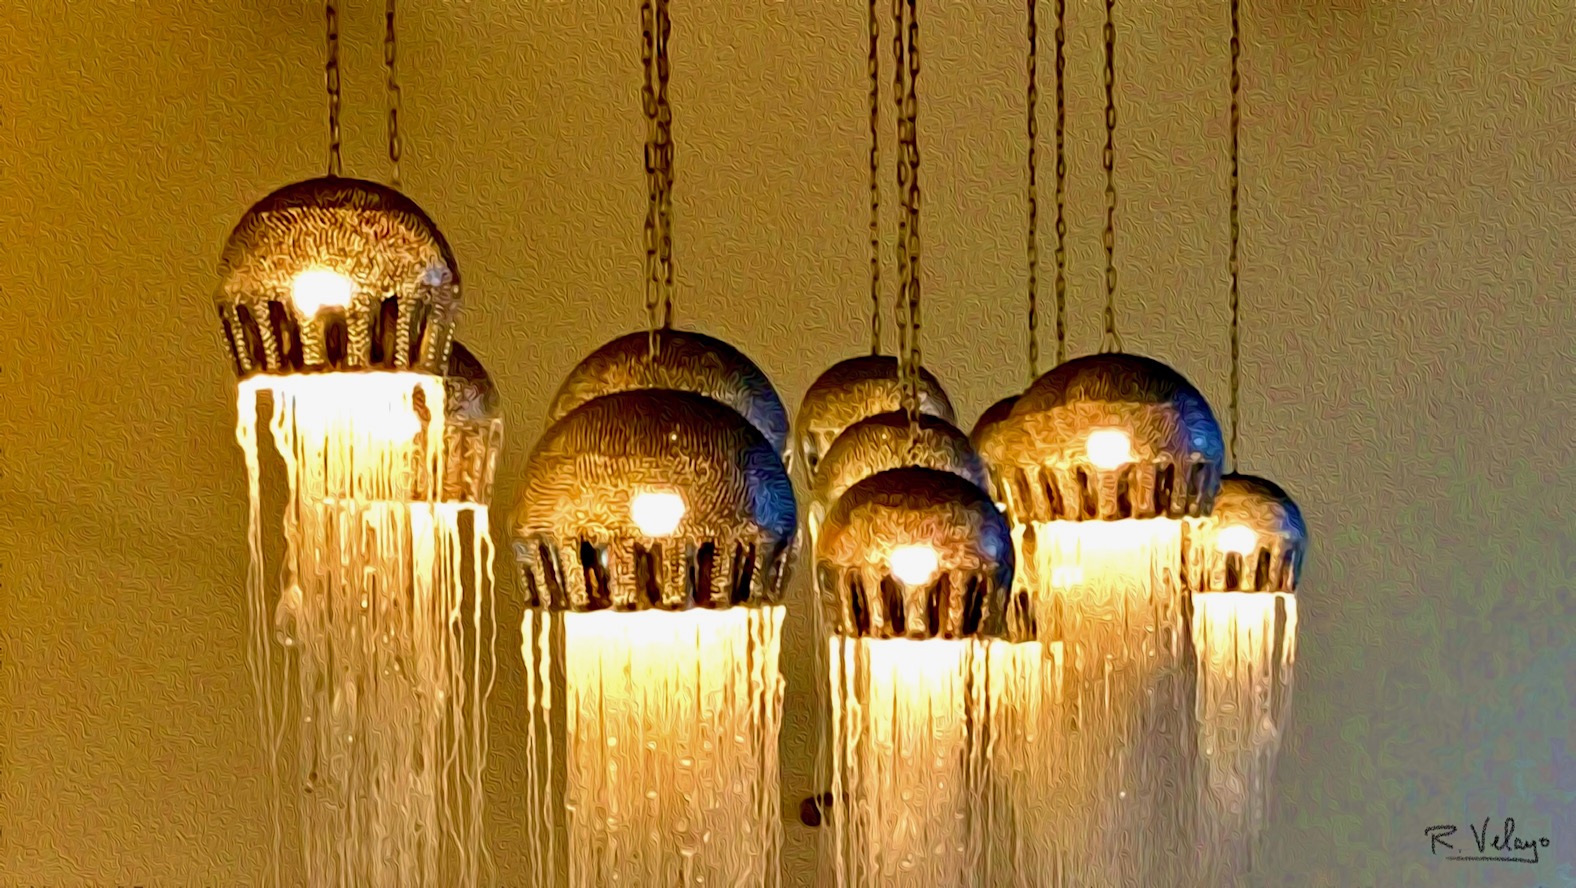 "JELLYFISH HANGING LAMPS AT THE HYATT IN NAPLES" [Created: 7/29/2021]